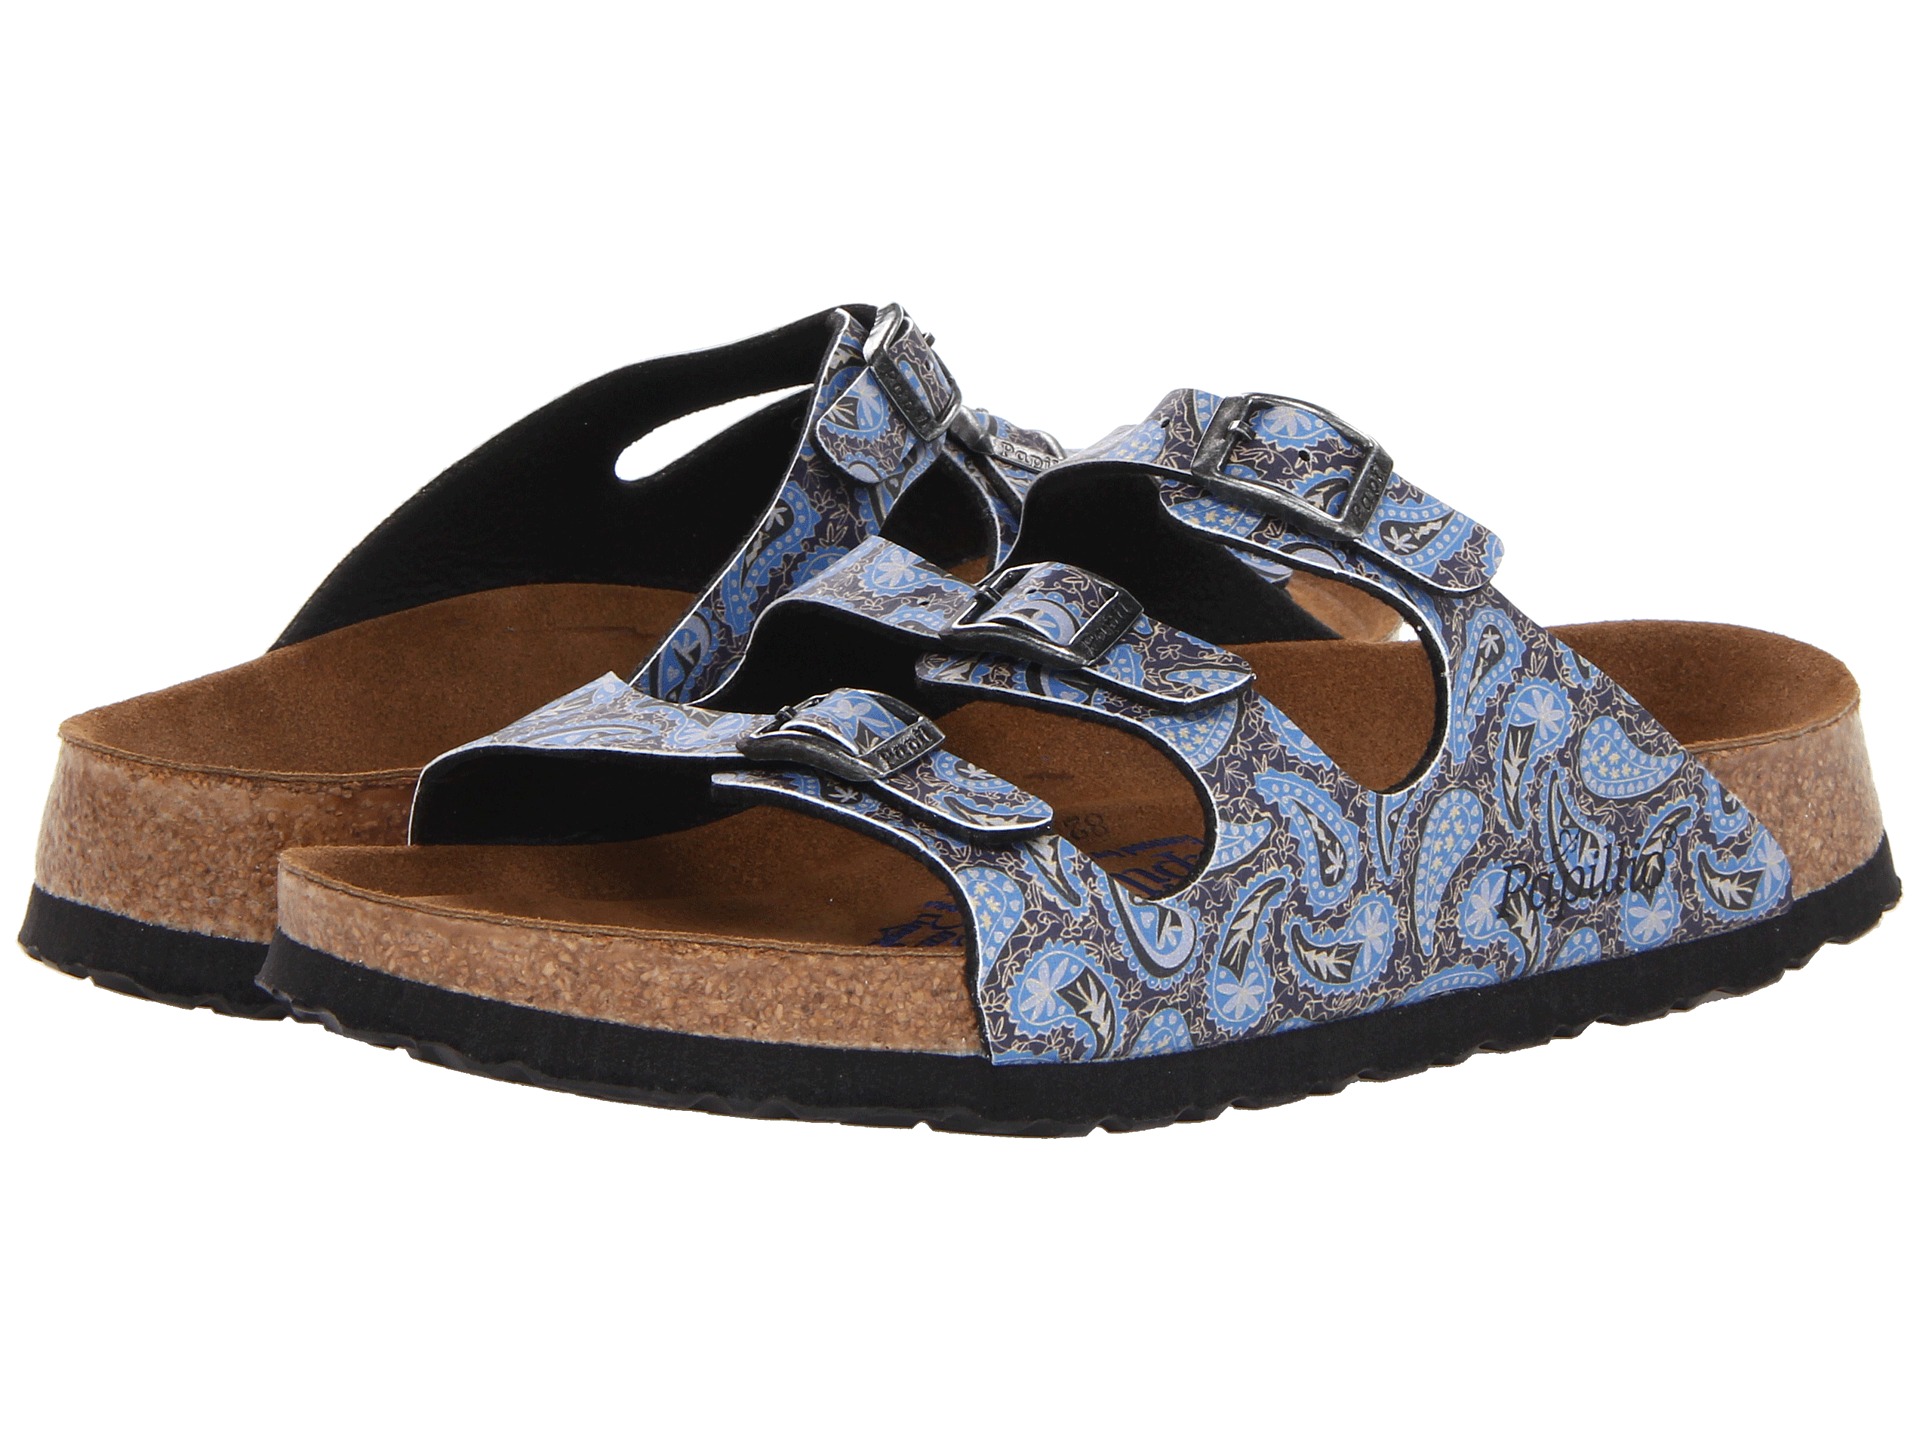 Birkenstock Florida Papillio By Birkenstock, Shoes | Shipped Free at ...